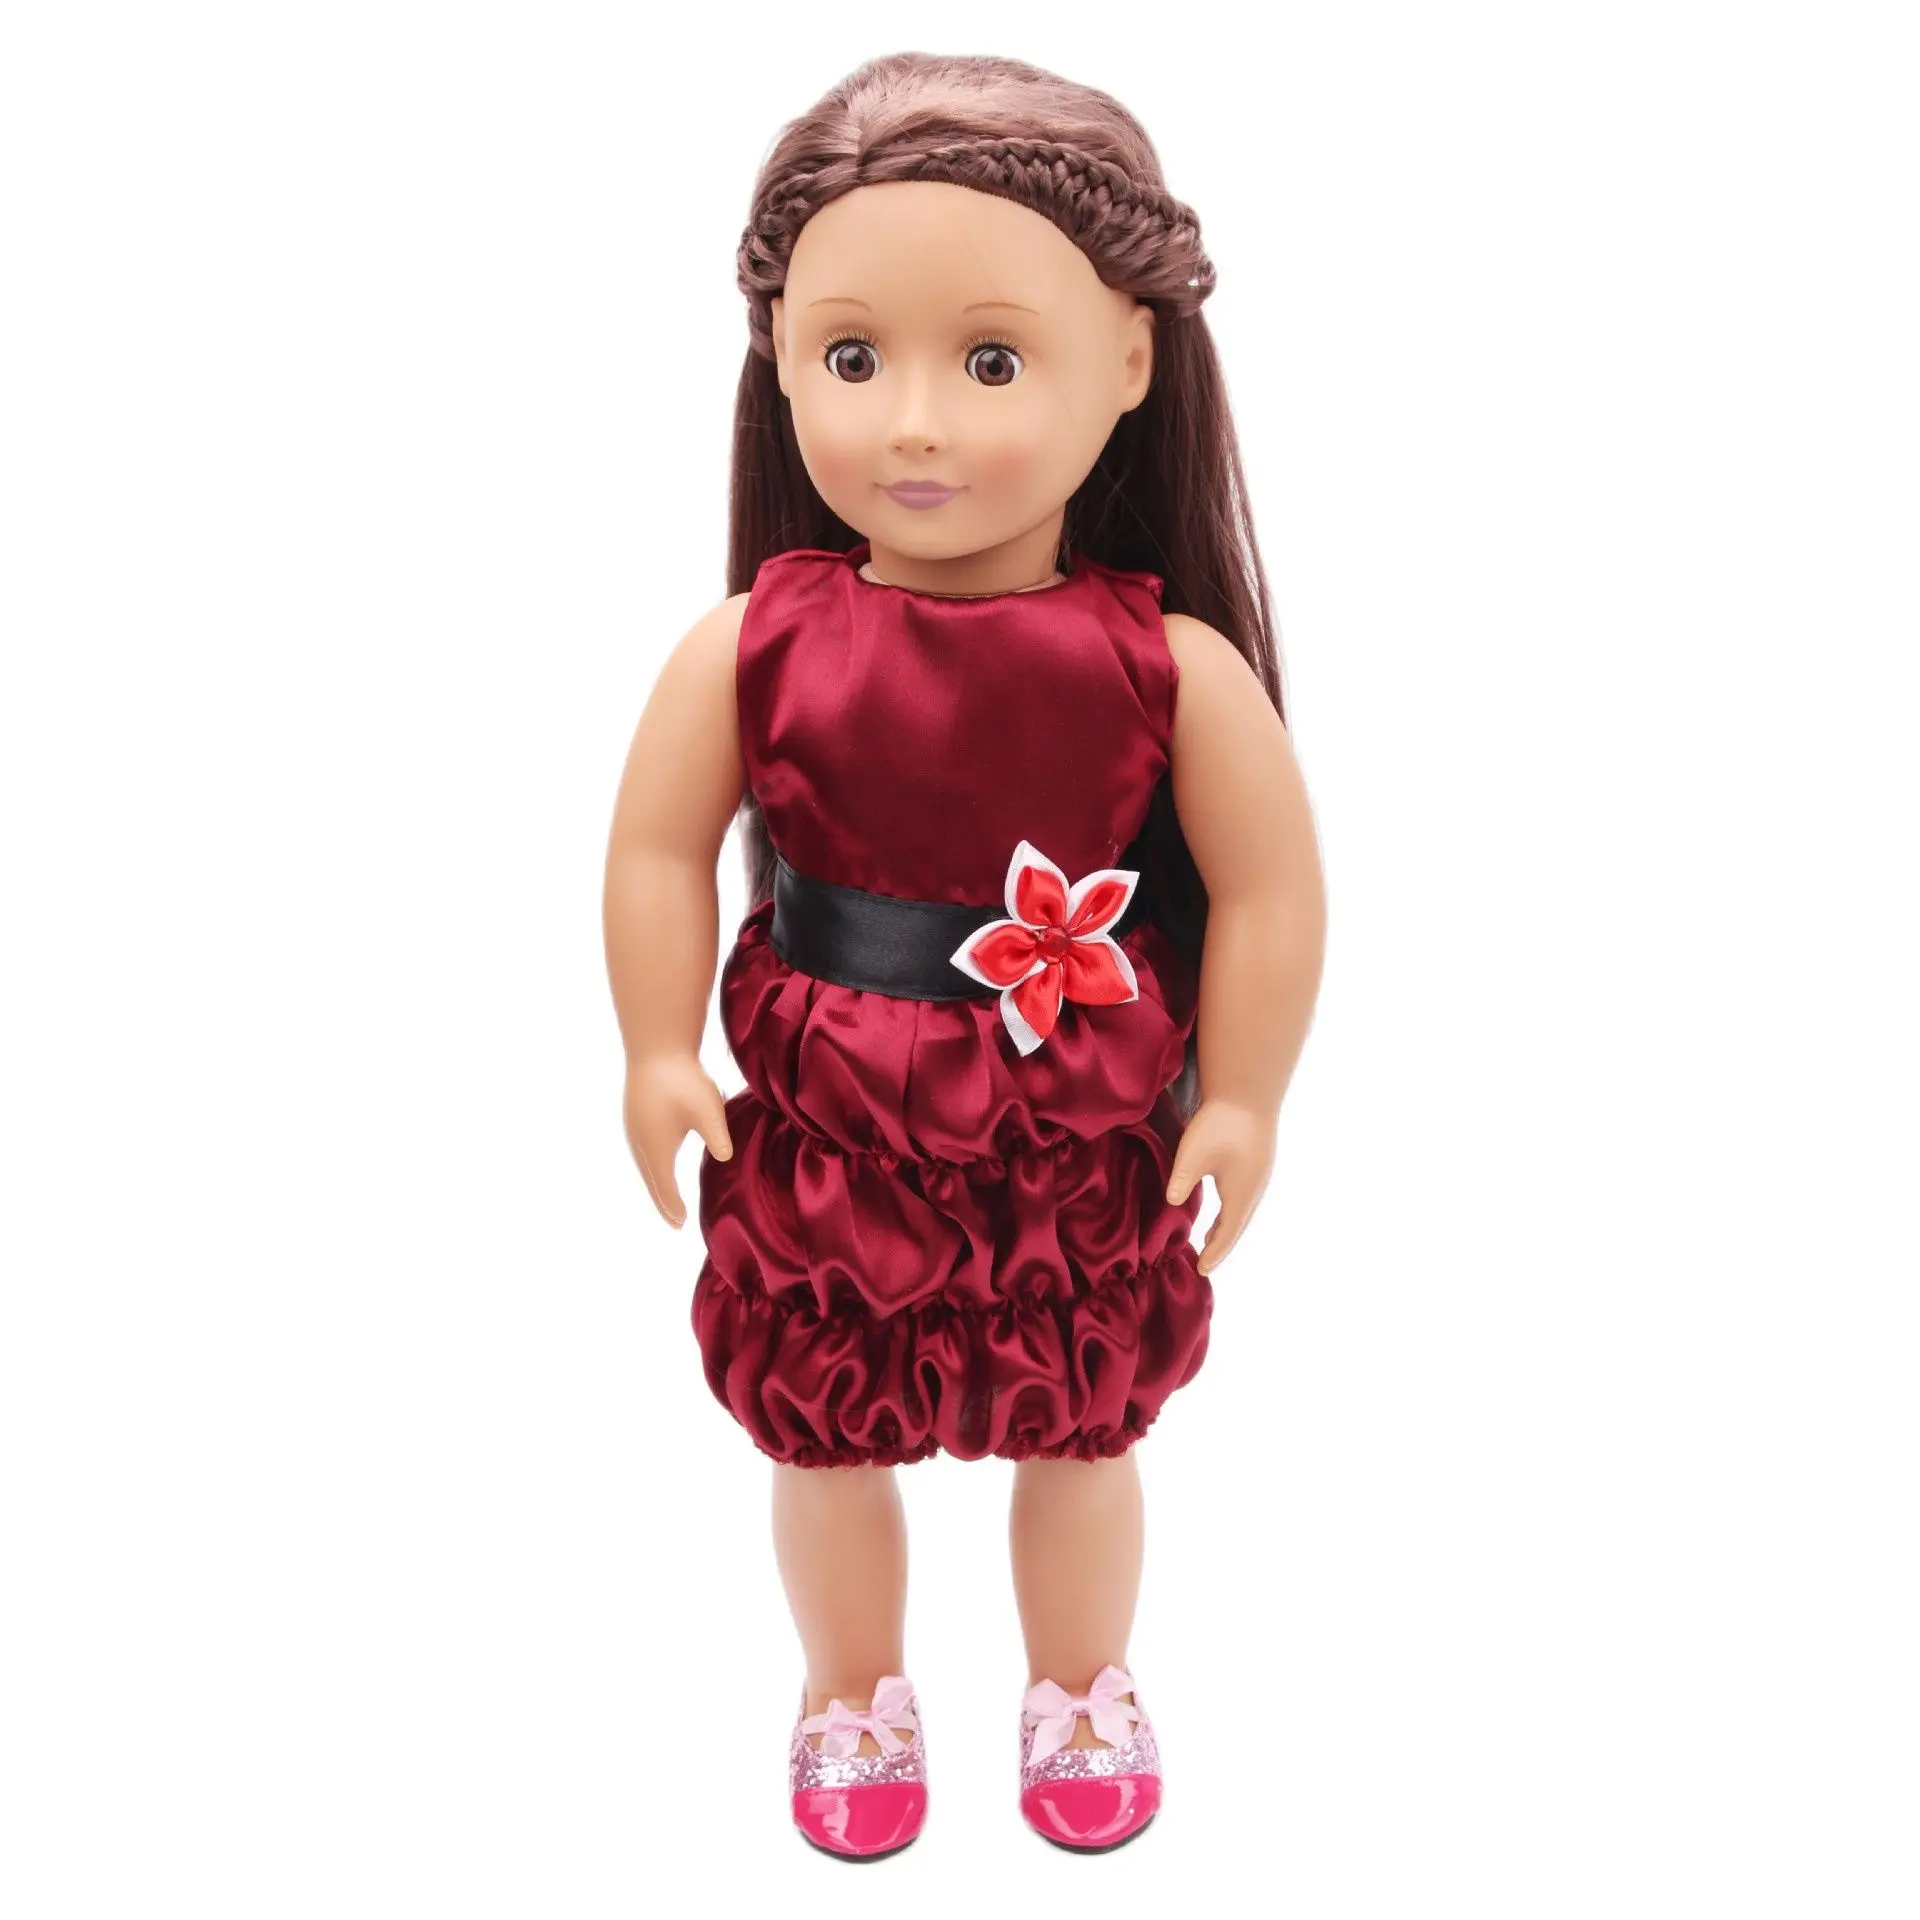 

2021 New Wine Red Dress New Born Baby Doll Clothes for 18" 43cm American Girl Reborn BJD Dolls Accessories Suit Outfit